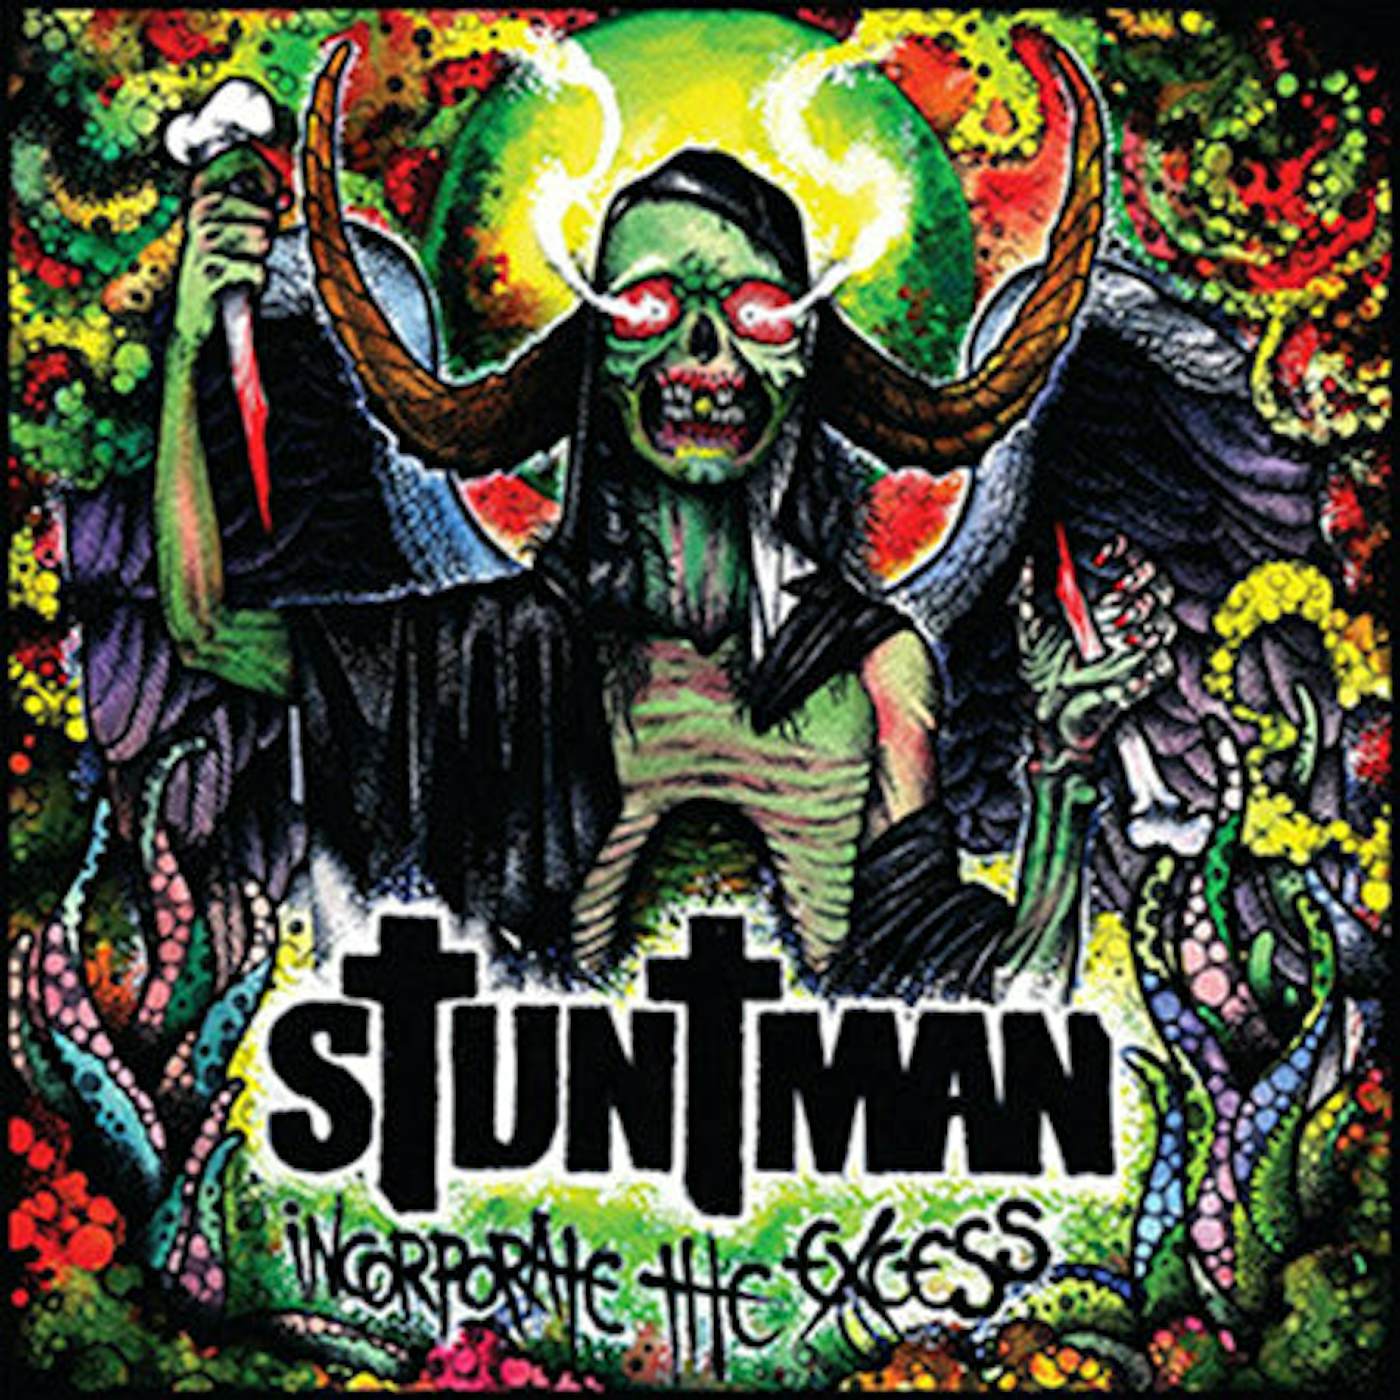 Stuntman – Incorporate The Excess CD